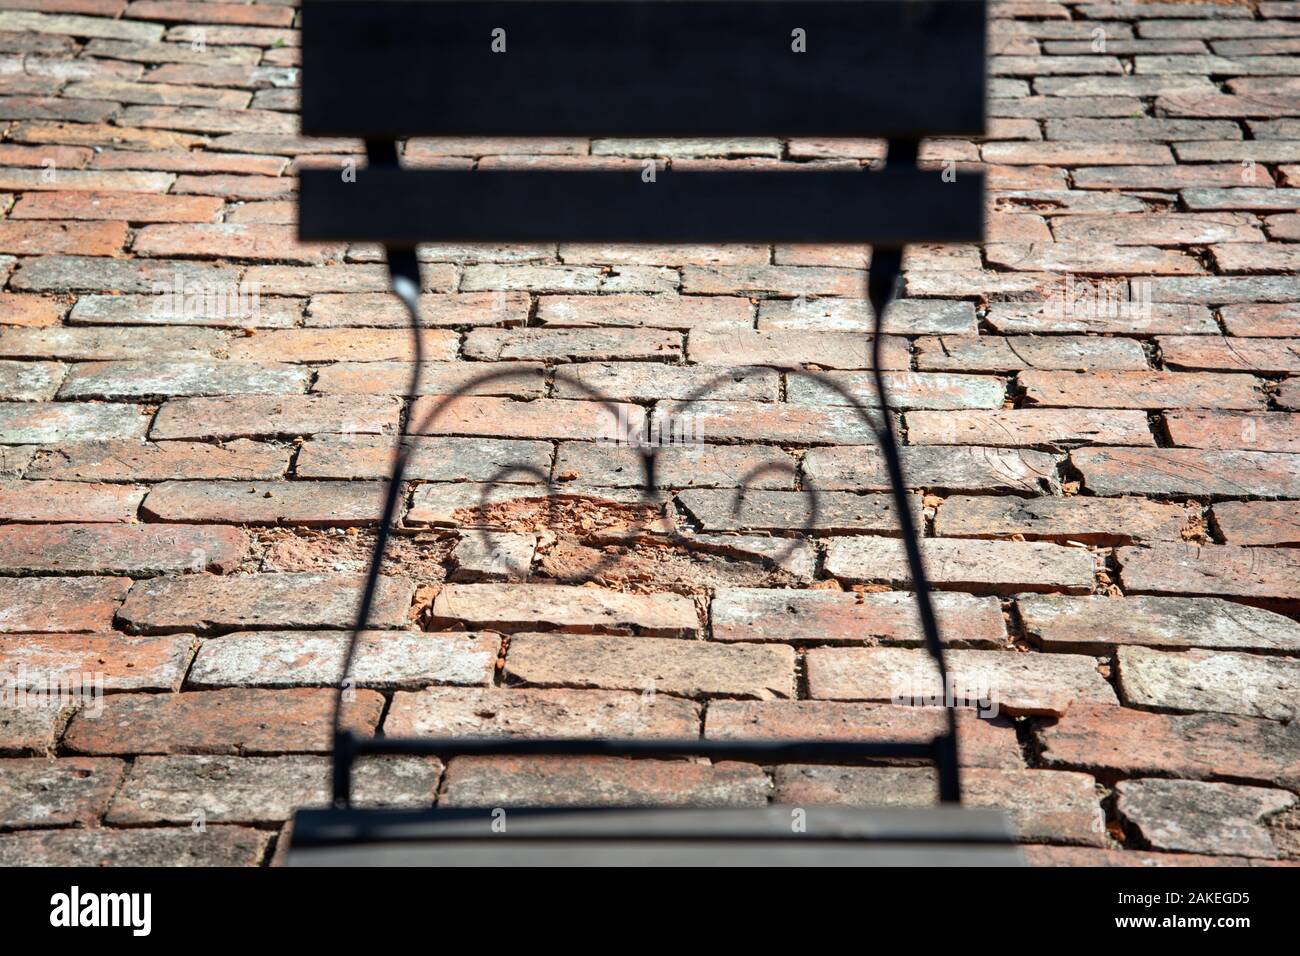 Brick surface with abstract unfocus silhouette of chair. Stock Photo